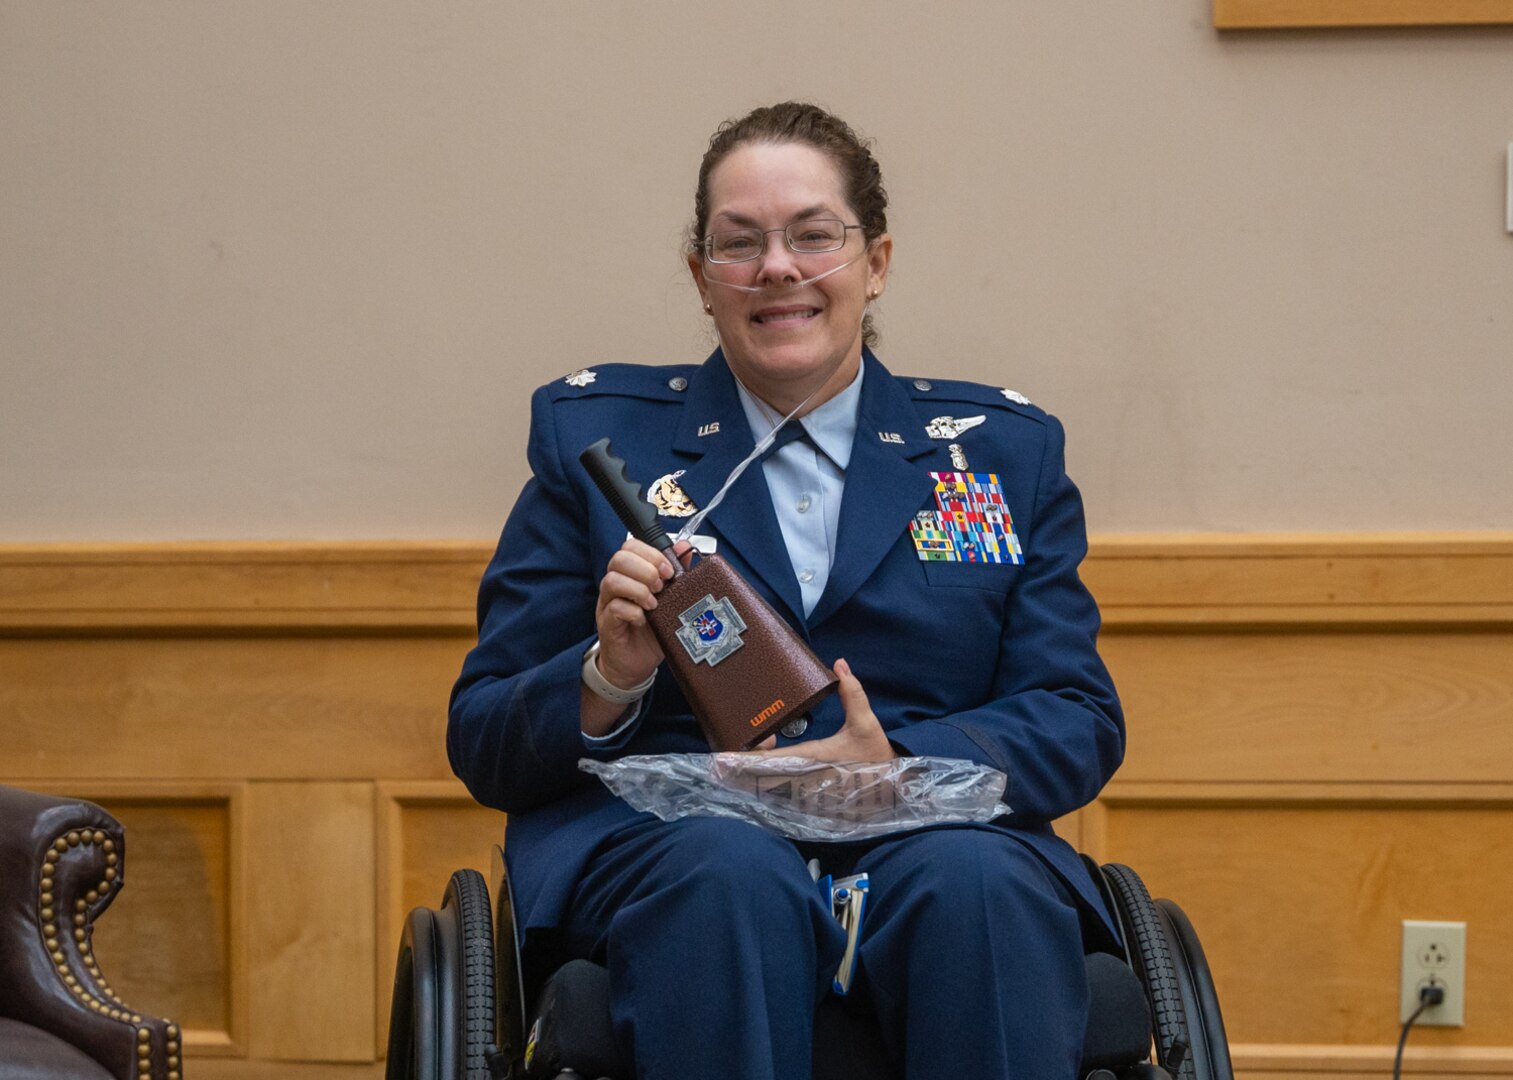 Lt. Col. (ret.) Dana Duerr, who recently served as Senior Program Manager of the Nurse Corps Education and Training Program at Air Force Medical Readiness Agency, is presented a cowbell featuring the 595th Medical Group commander’s coin during her retirement ceremony in the Gateway Club at Joint Base San Antonio-Lackland, Texas, Aug. 30, 2023. Col. John Davis, 959th MDG commander and presiding officer over the ceremony, gifted the cowbells to Duerr and Mikaela as a symbol that their care for others was instrumental in making a difference. (U.S. Air Force photo by Senior Airman Melody Bordeaux)